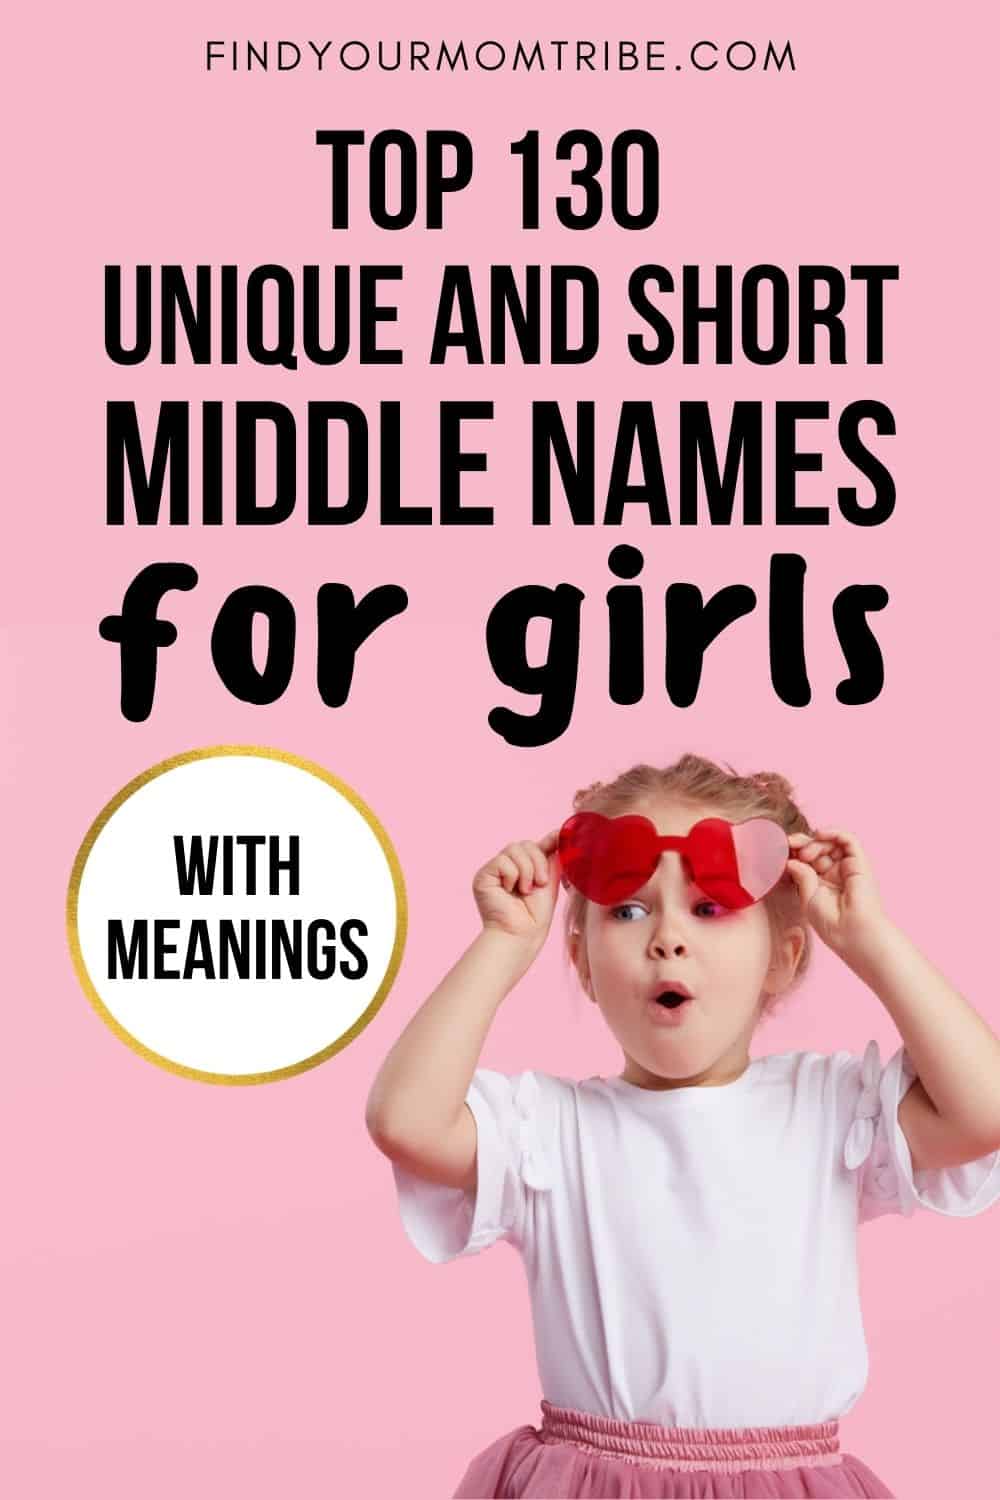 Top 130 Unique And Short Middle Names For Girls With Meanings Pinterest